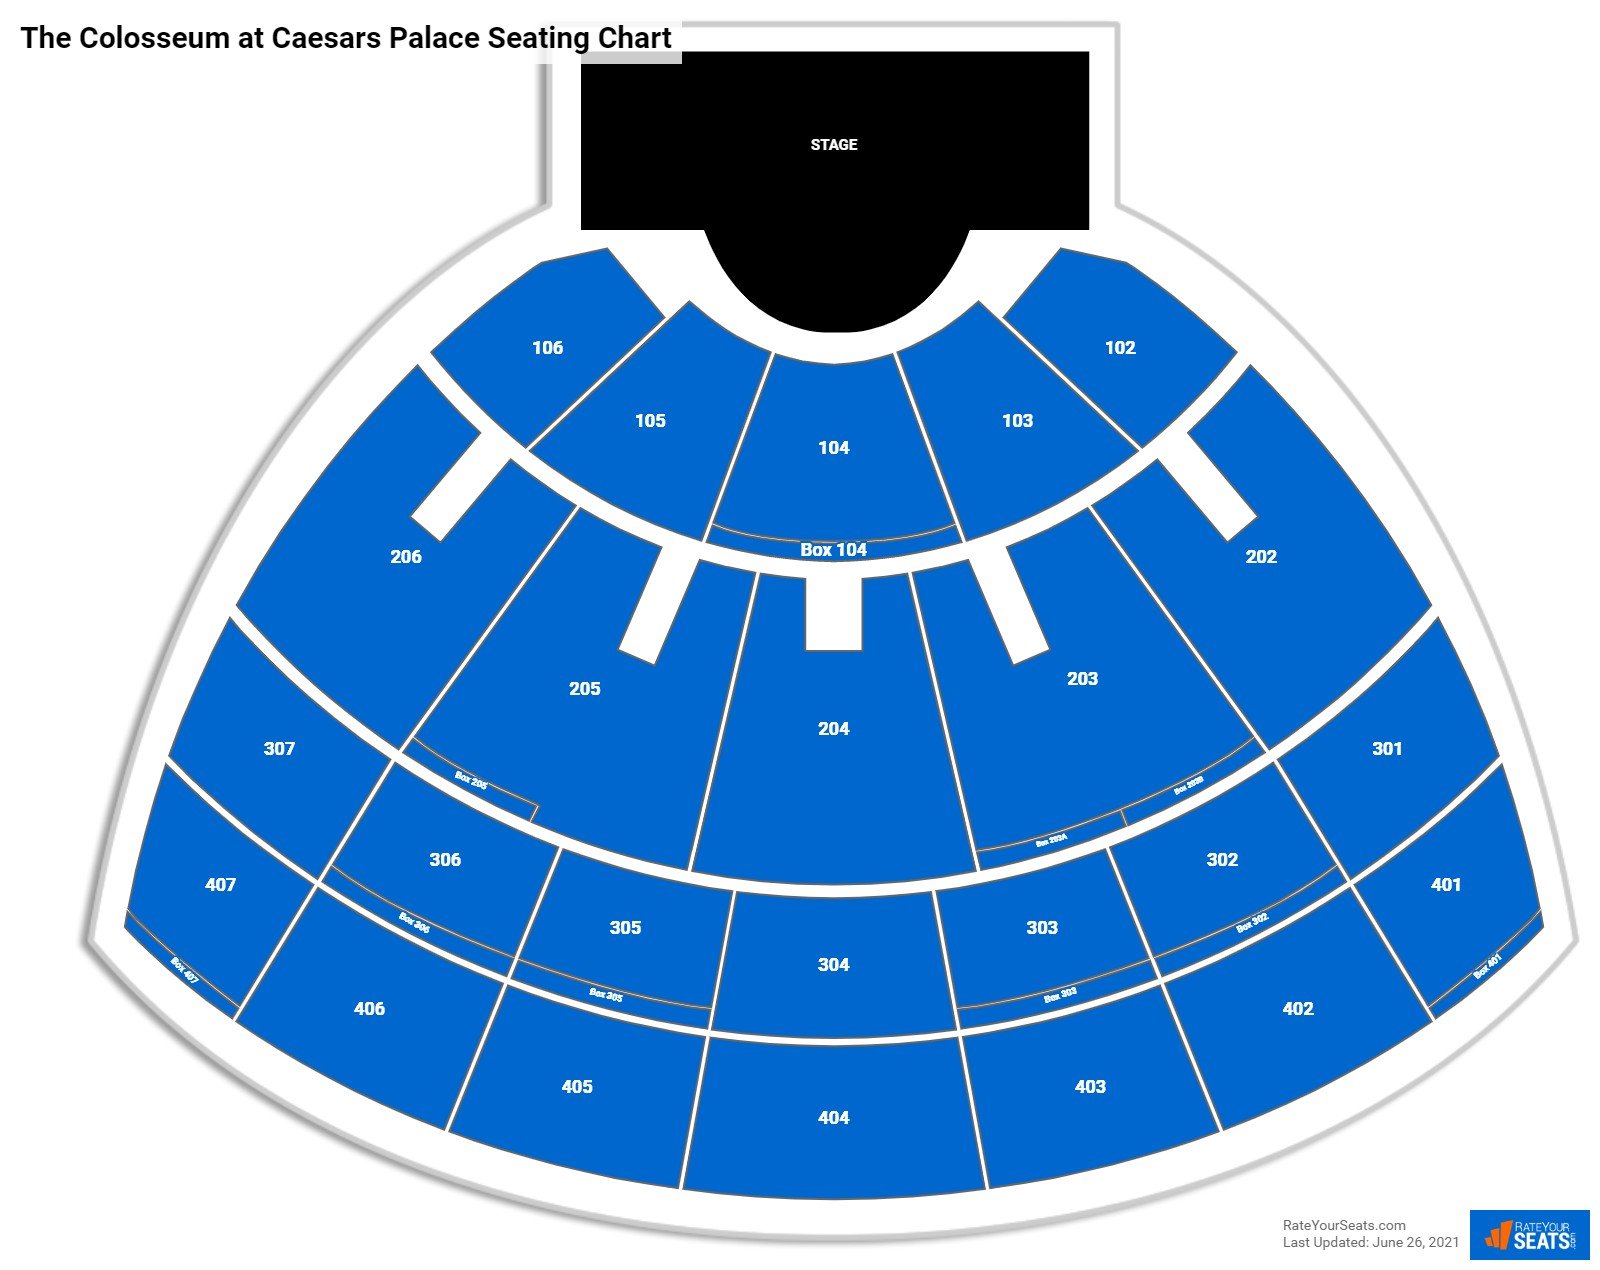 The Colosseum at Caesars Palace Seating Chart 